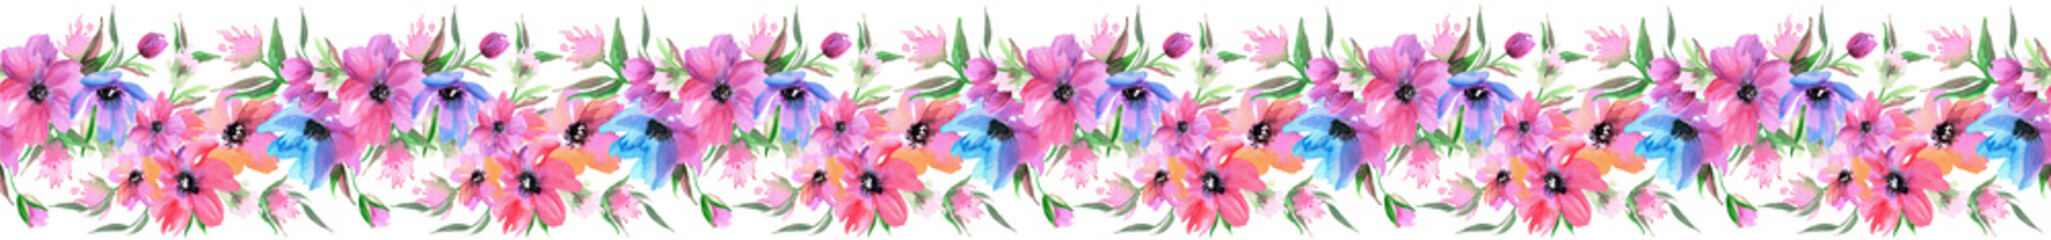 Colorful watercolor seamless floral border. Pink and blue flowers